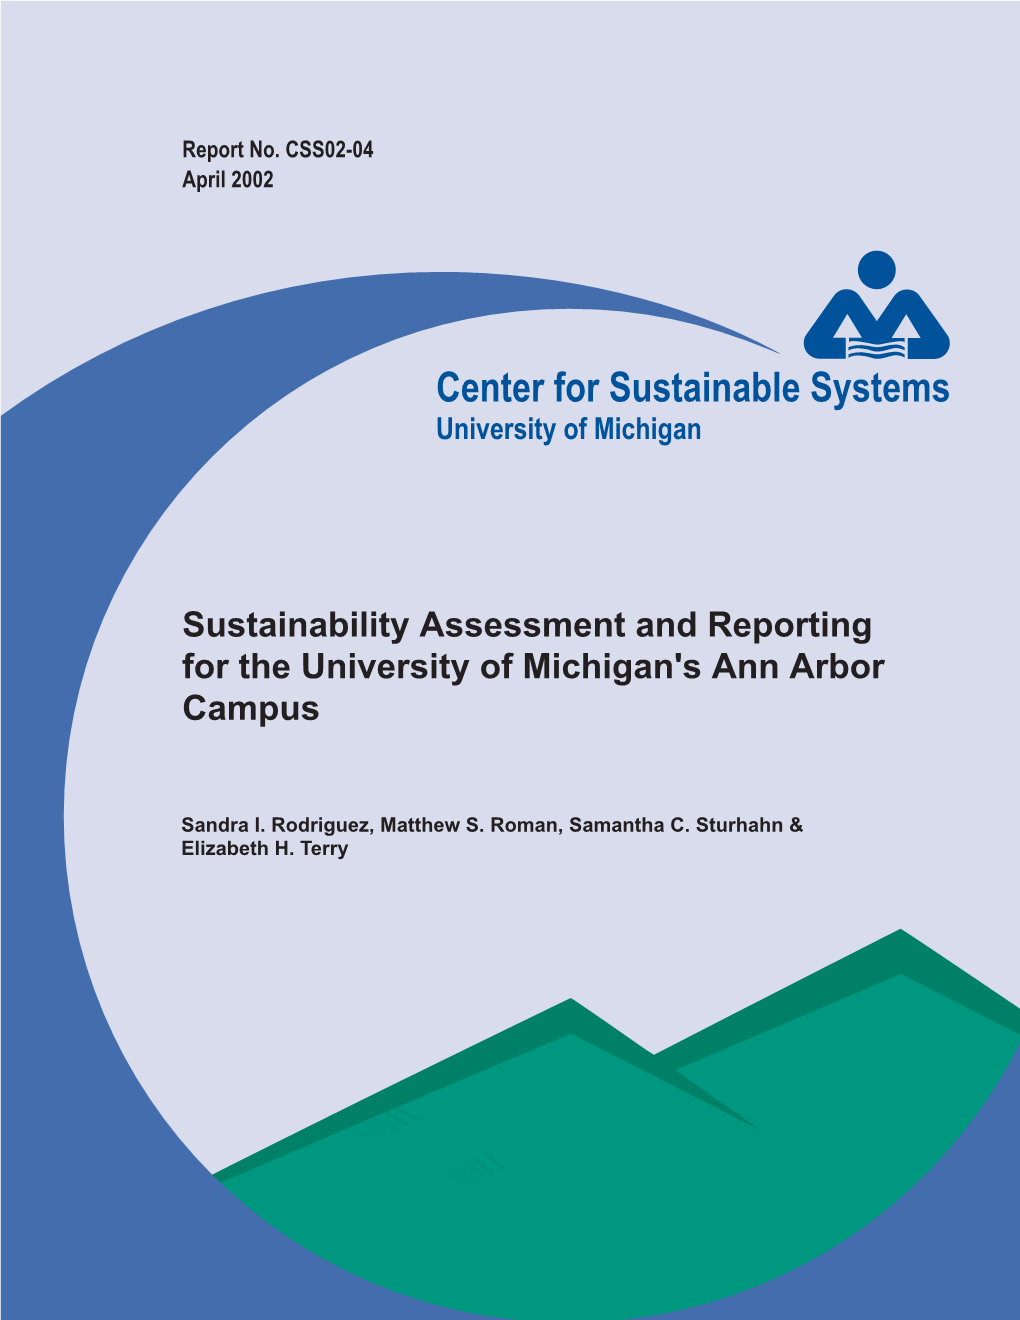 Sustainability Assessment and Reporting for the University of Michigan's Ann Arbor Campus